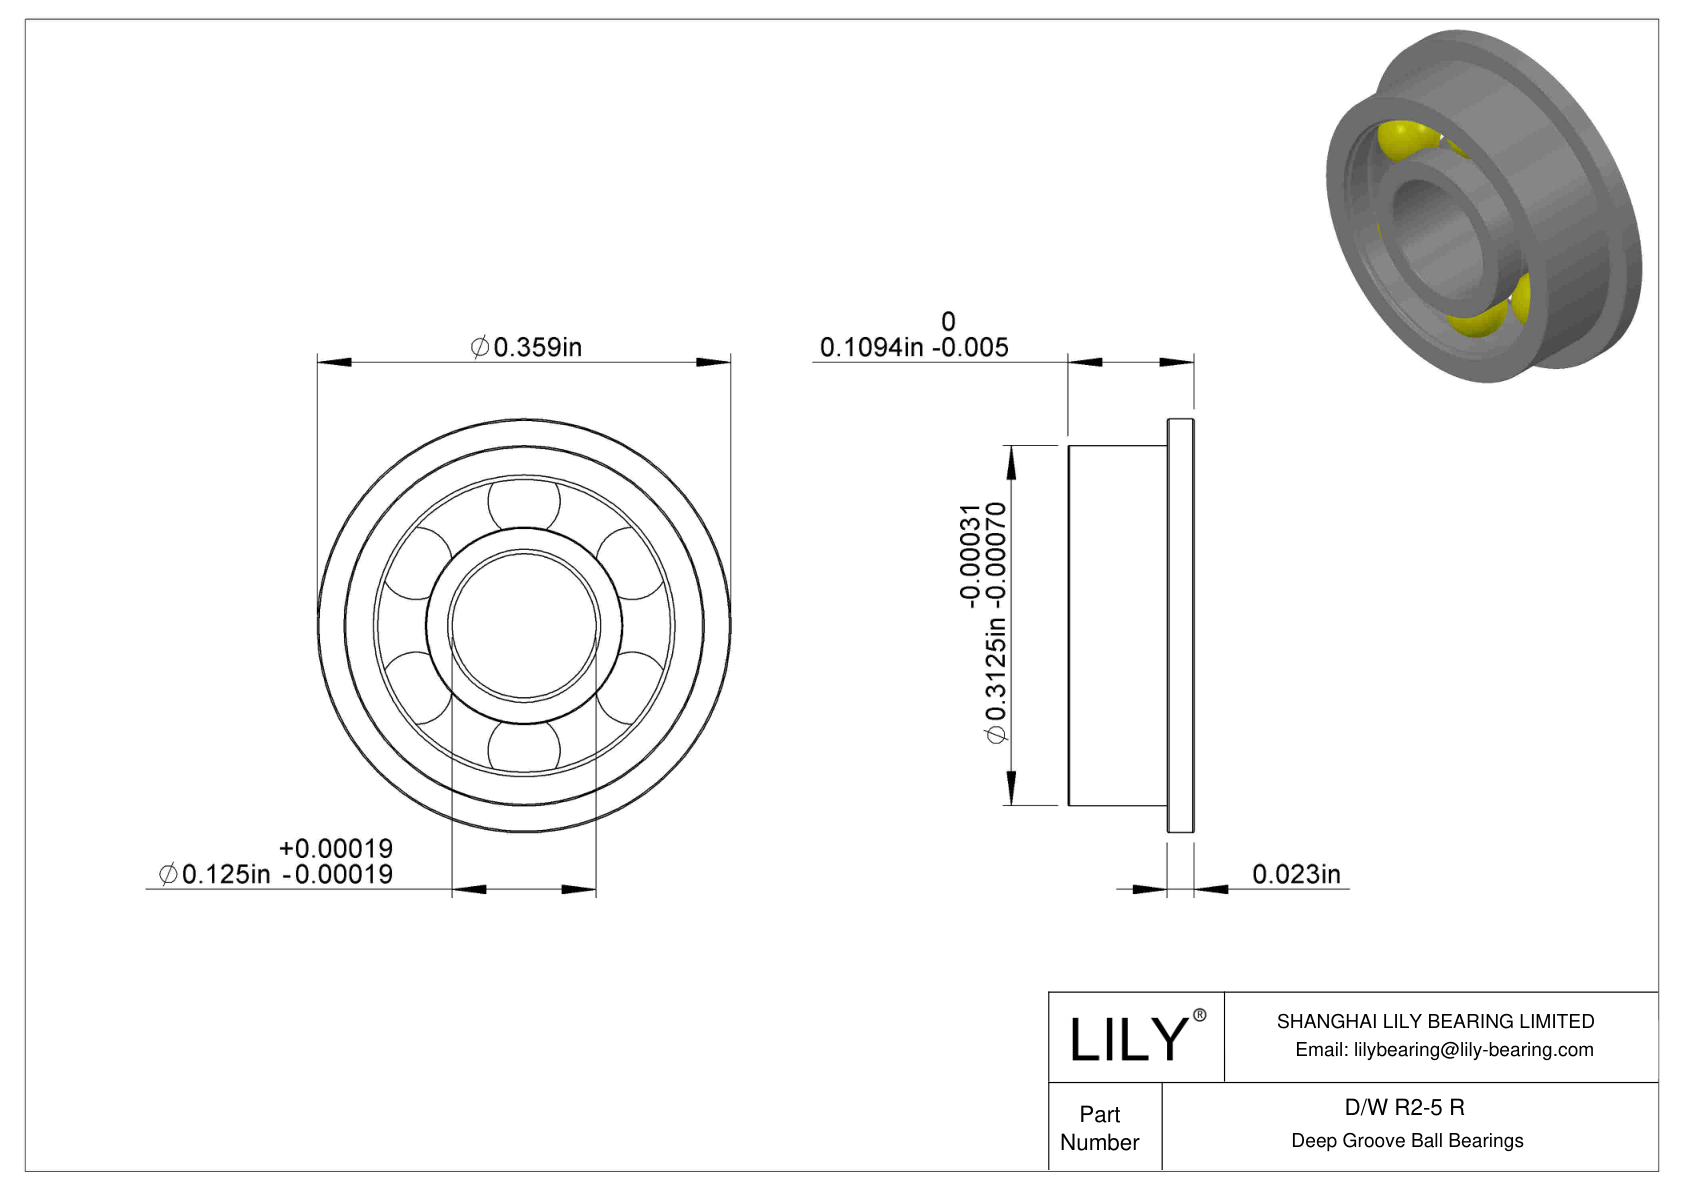 D/W R2-5 R Flanged Ball Bearings cad drawing